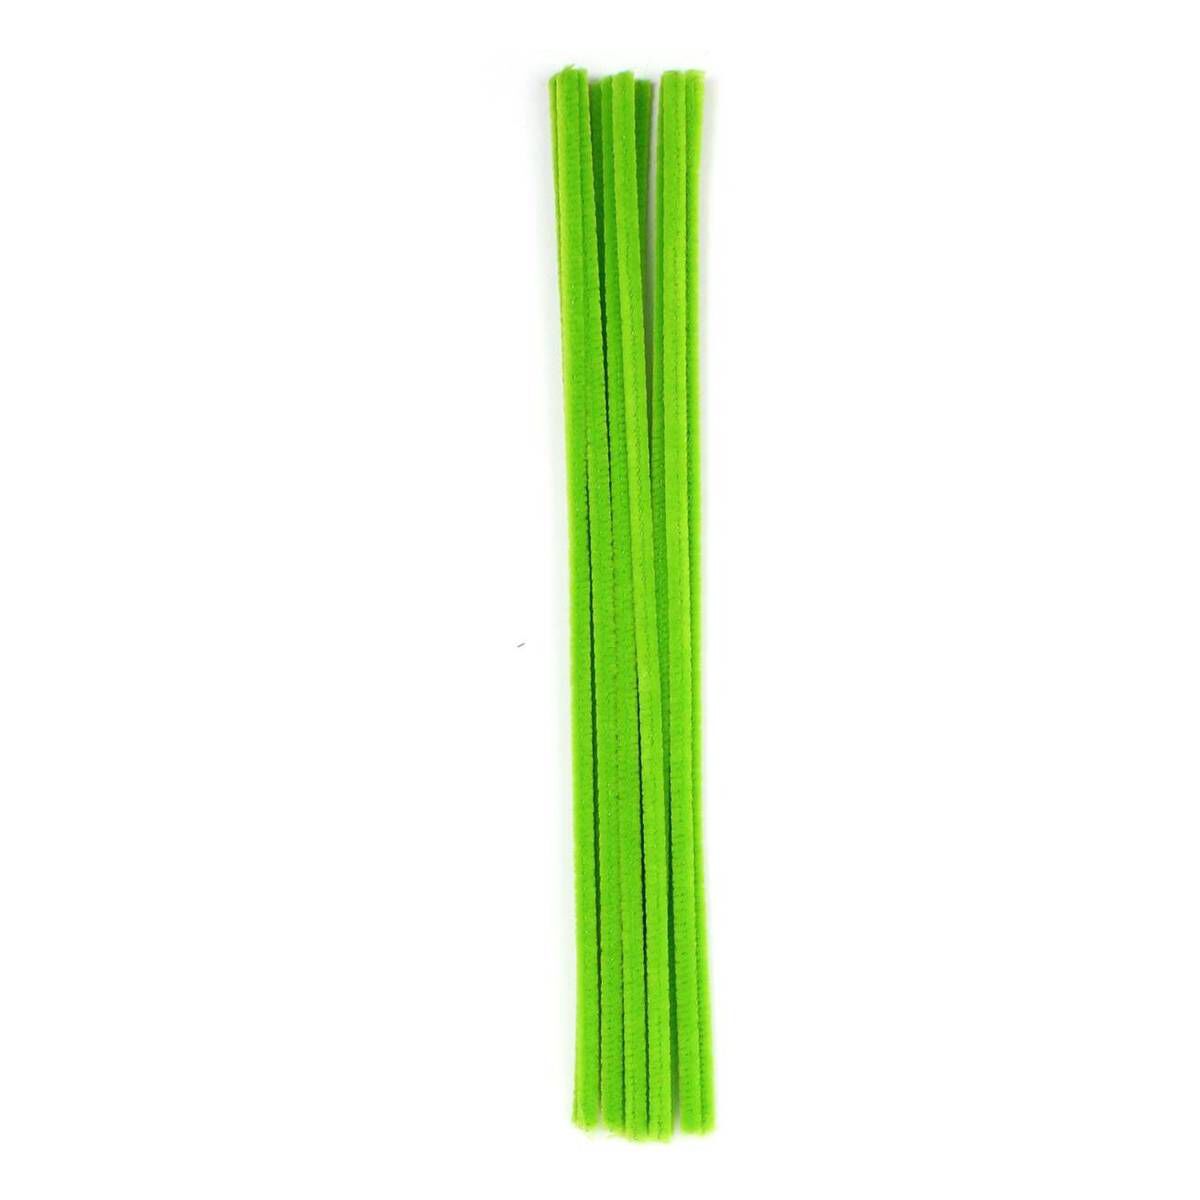 Bright Green Pipe Cleaners 12 Pack | Hobbycraft